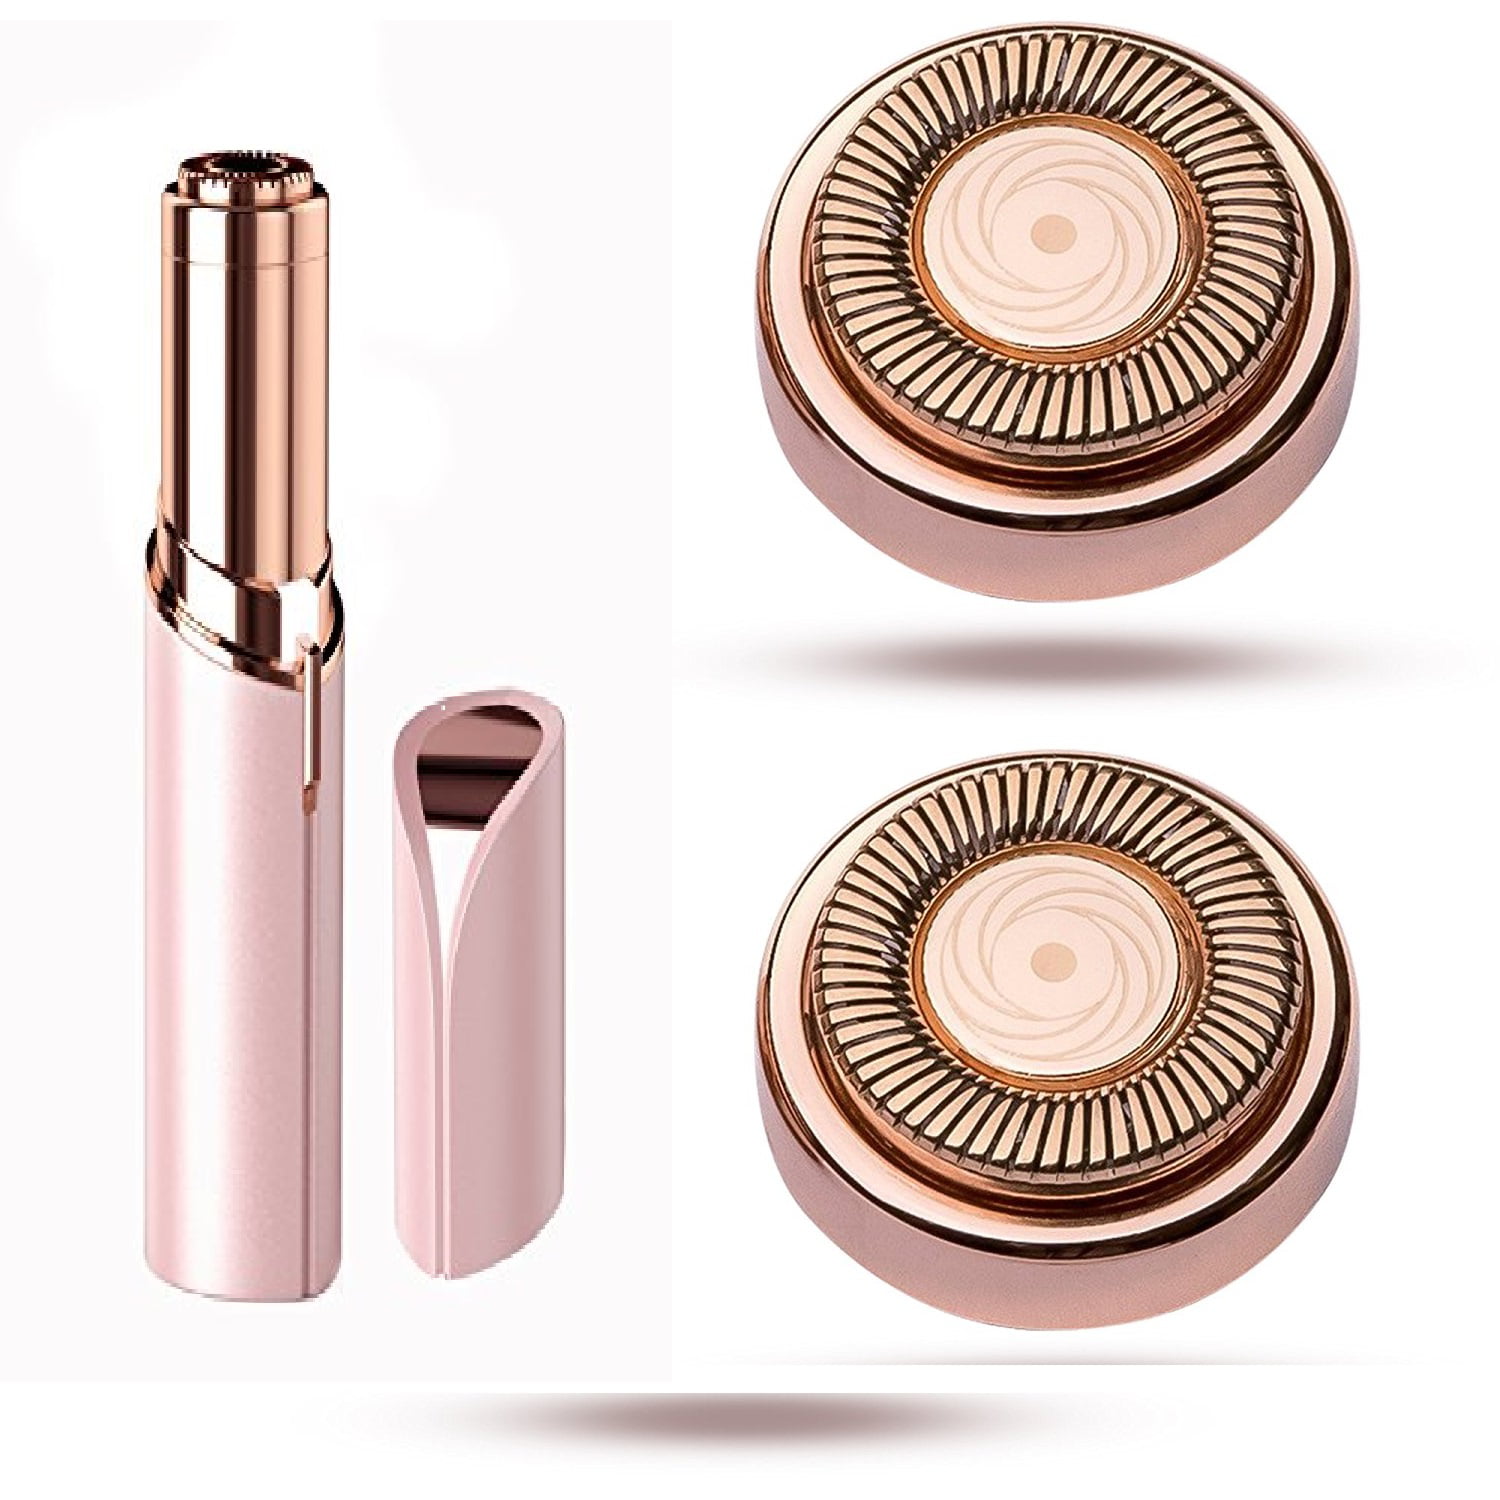 Finishing Touch Flawless Women's Painless Hair Remover, Blush/Rose Gold  With 2 Replacement Heads 